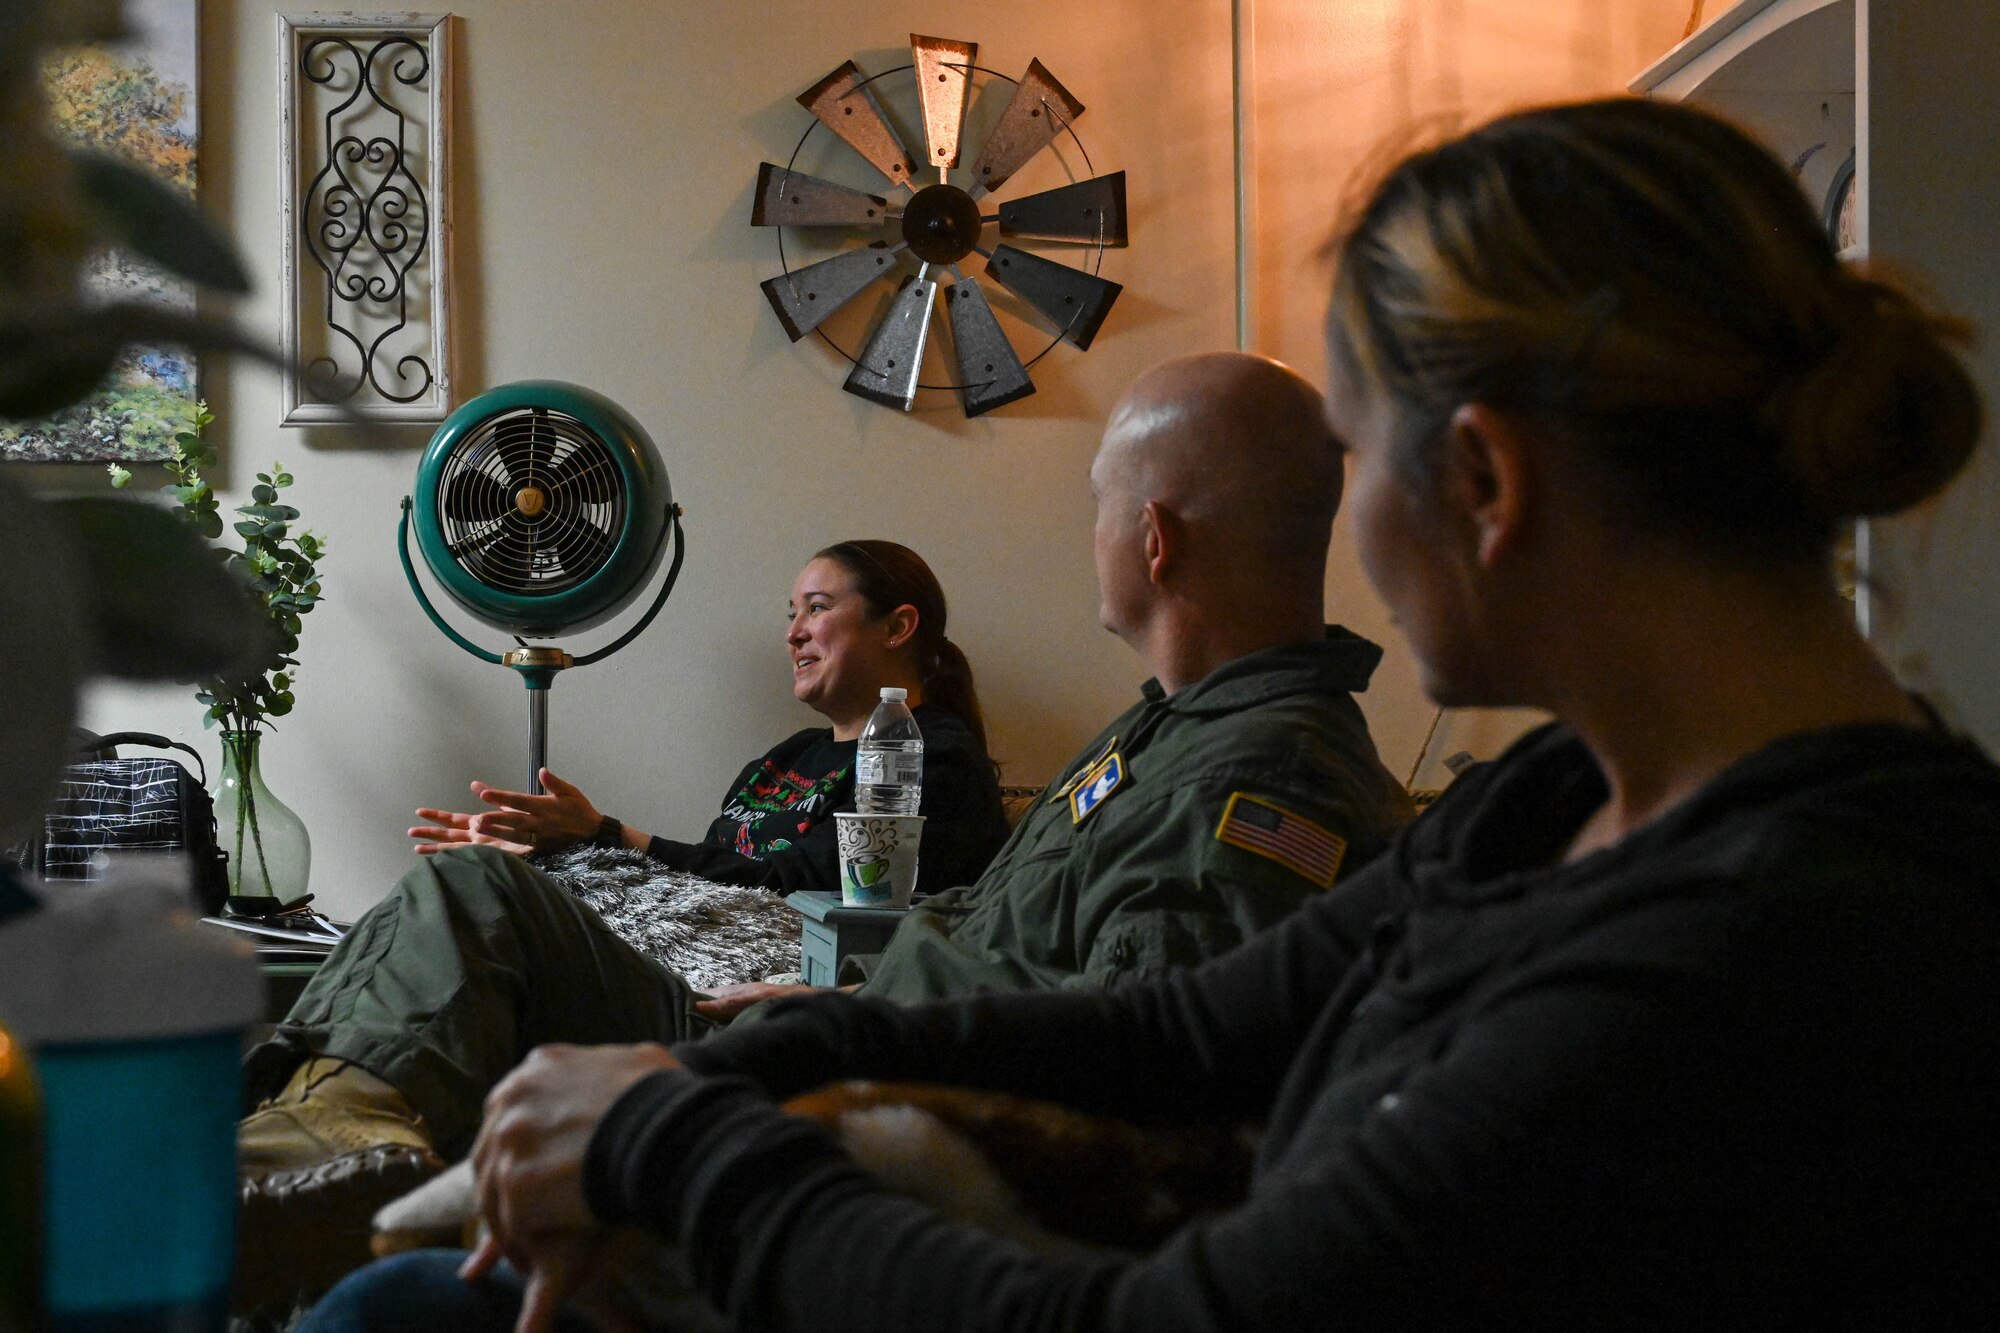 Master Sgt. Amanda Gilbert, 97th Healthcare Operations Squadron SEL, gives advice to Airmen during a coping skills class at Altus Air Force Base, Oklahoma, Dec. 12, 2022. The class meets once a week for a three-hour discussion with guest speakers, all led by Gilbert and Master Sgt. Monique Tester, 97th Air Mobility Wing commander’s action group SEL. (U.S. Air Force photo by Senior Airman Trenton Jancze)